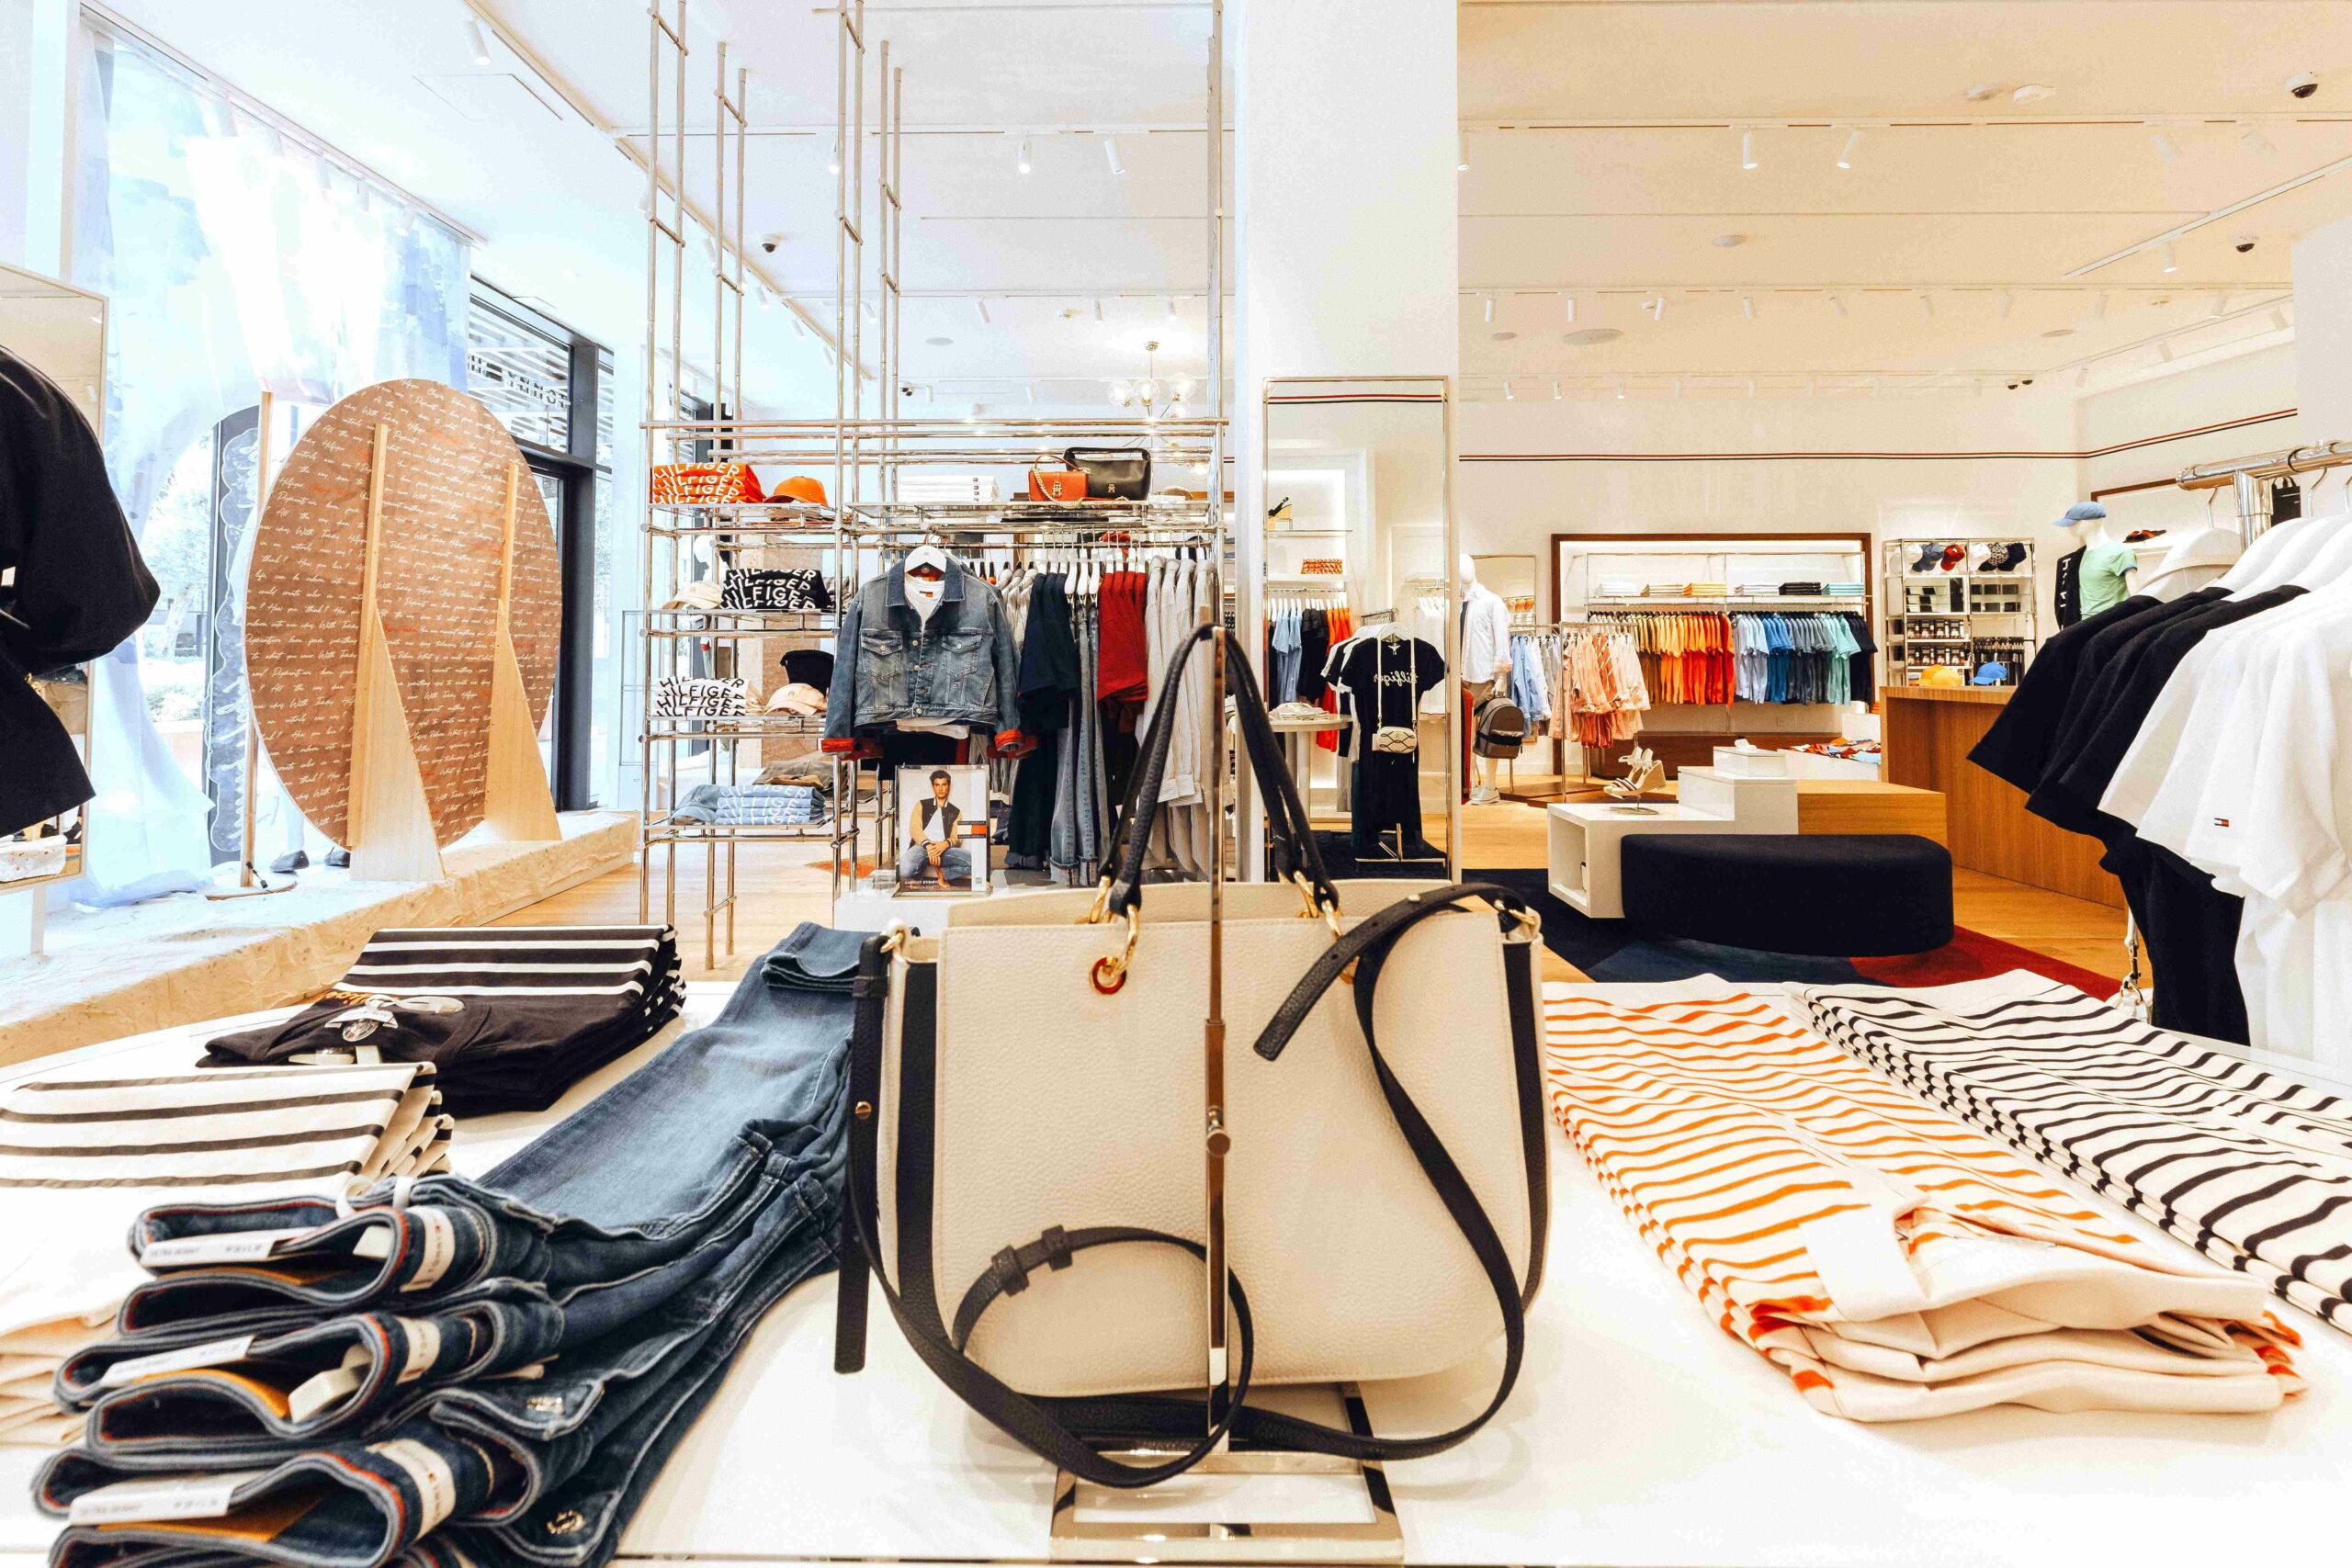 Hudson opens Fifth Tommy Hilfiger Store in Morocco - Hudson Holdings